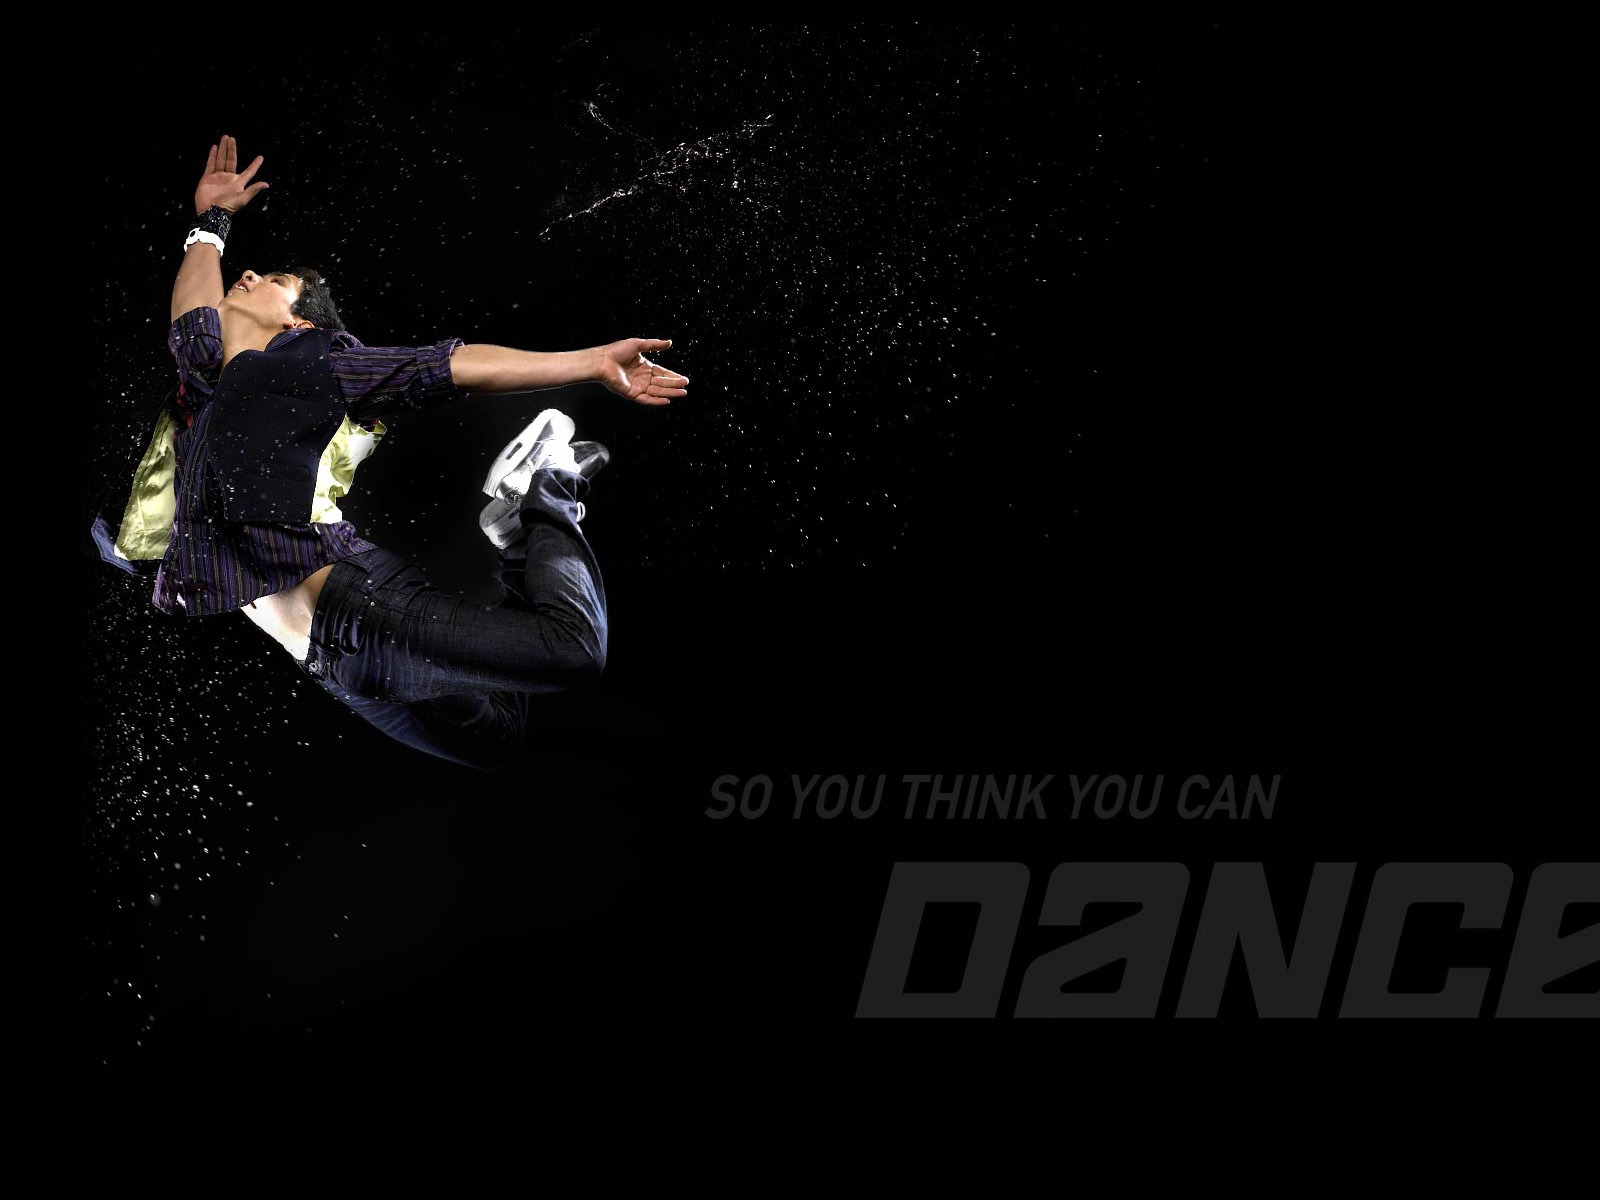 So You Think You Can Dance Wallpaper (1) #8 - 1600x1200